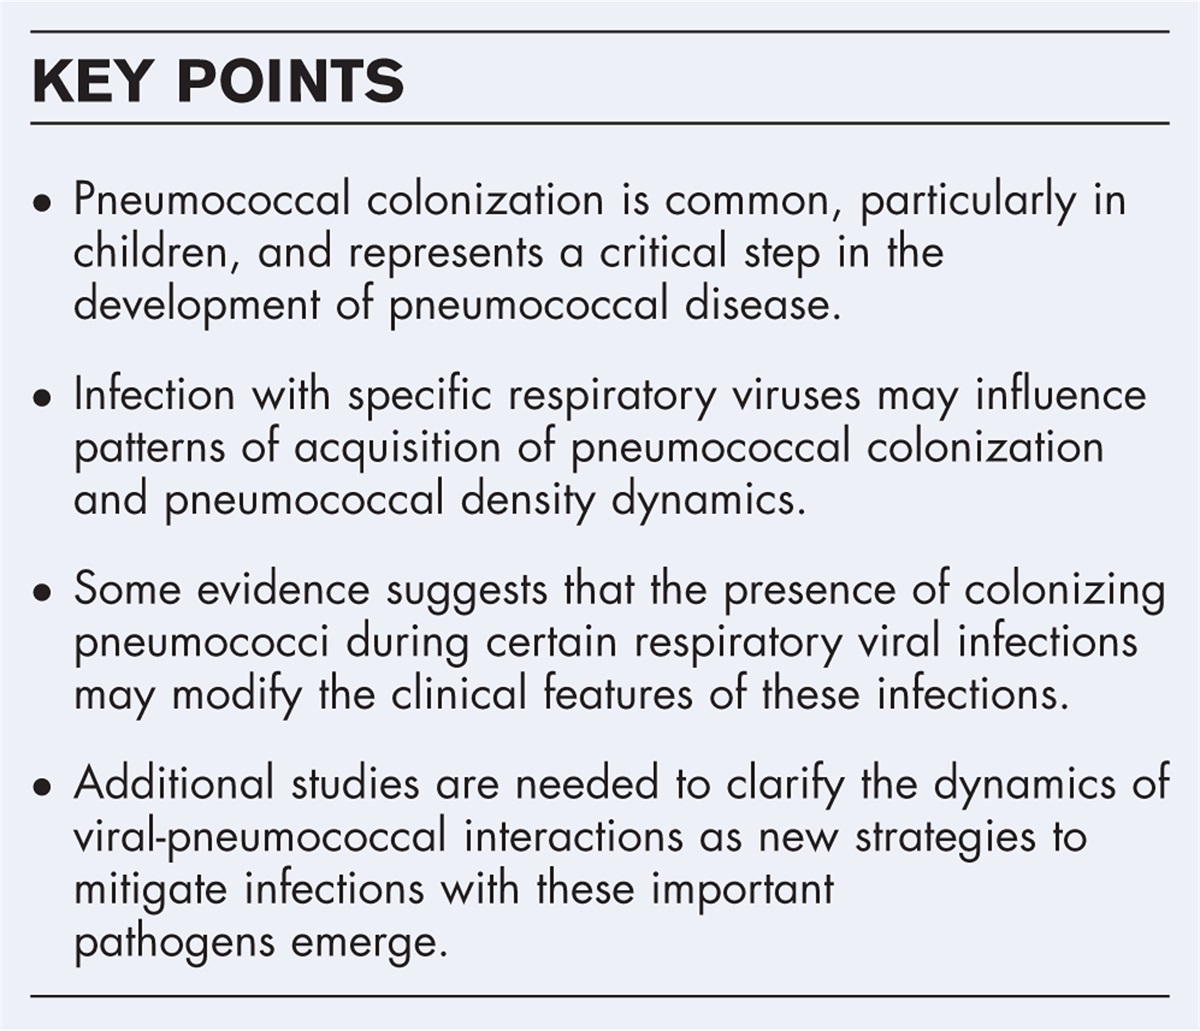 Impact of respiratory viral infections on nasopharyngeal pneumococcal colonization dynamics in children